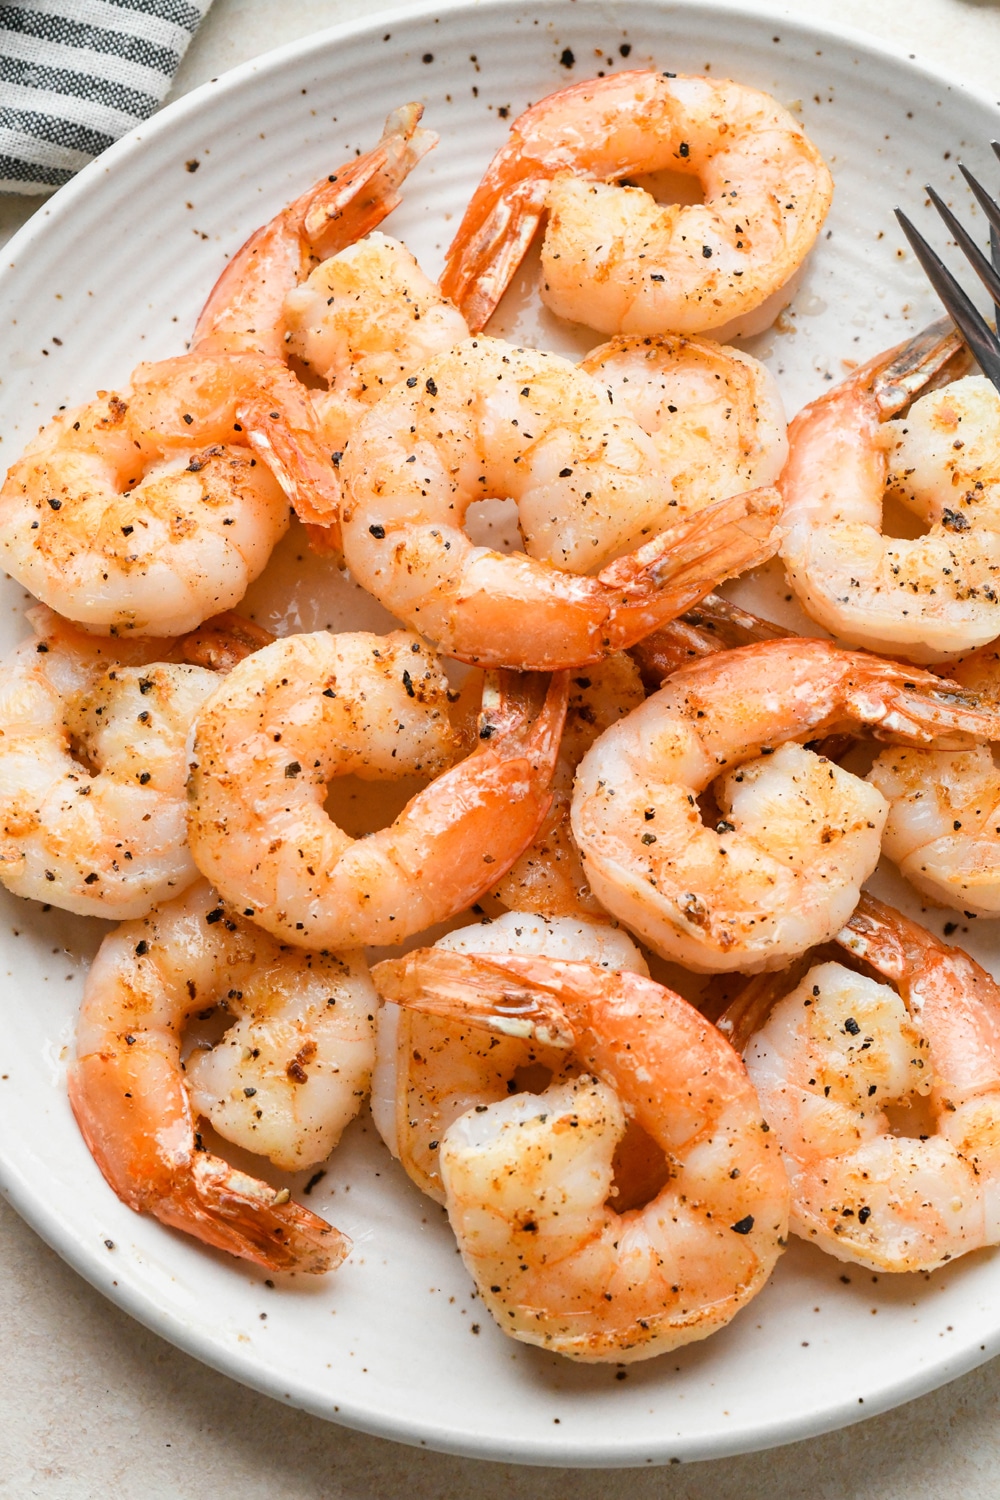 Pan seared shrimp on a large speckled white plate next to a striped napkin.